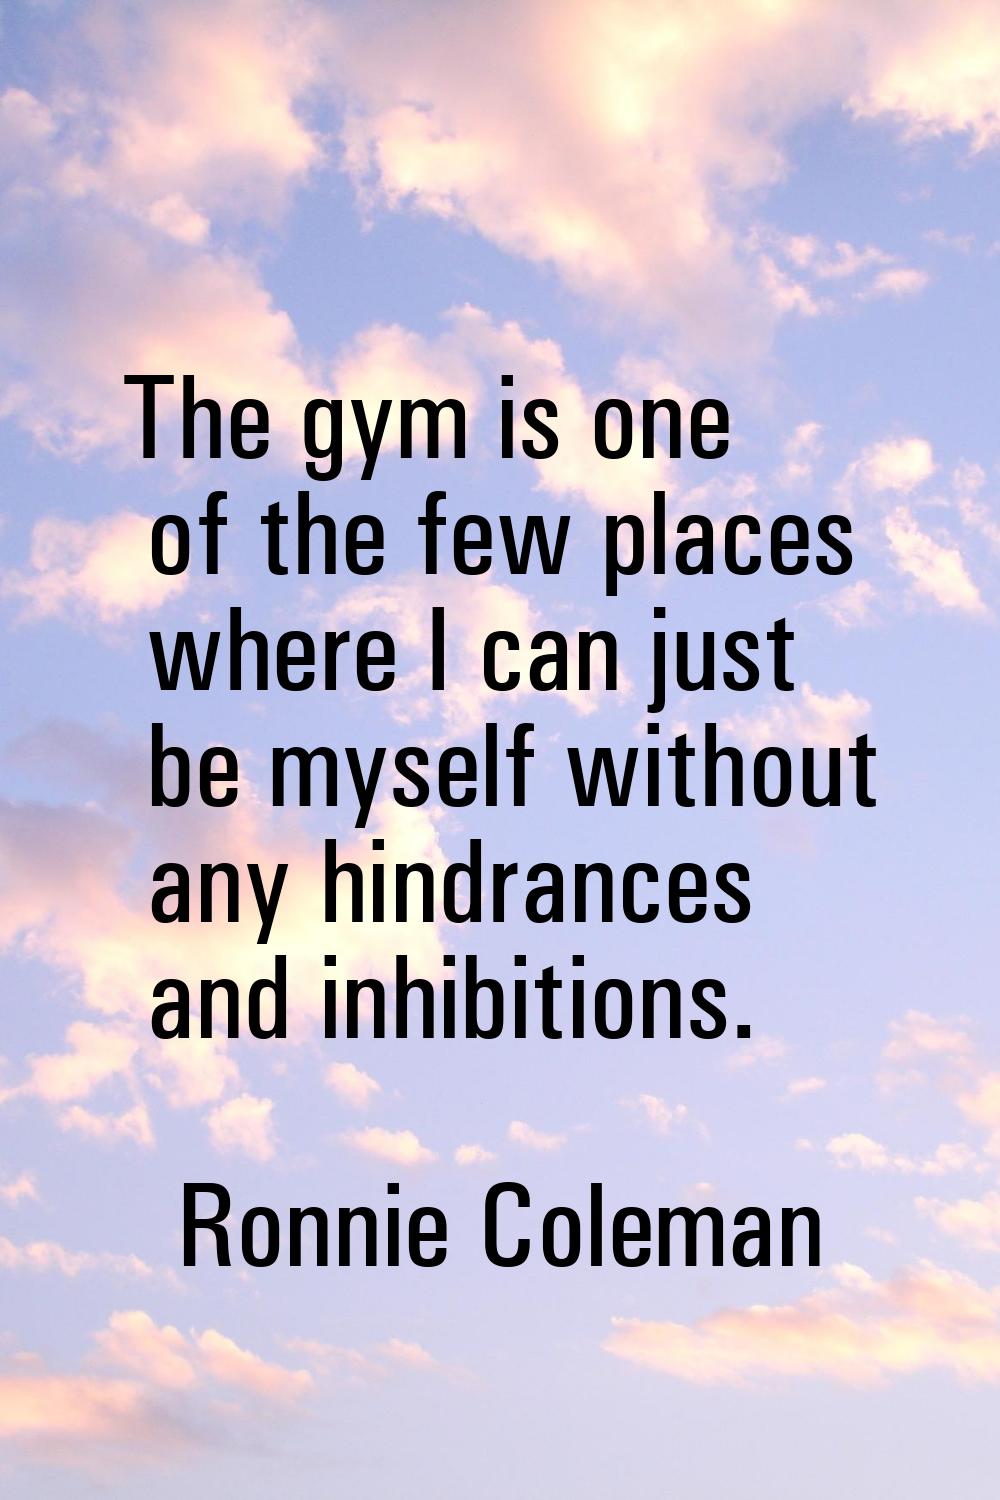 The gym is one of the few places where I can just be myself without any hindrances and inhibitions.